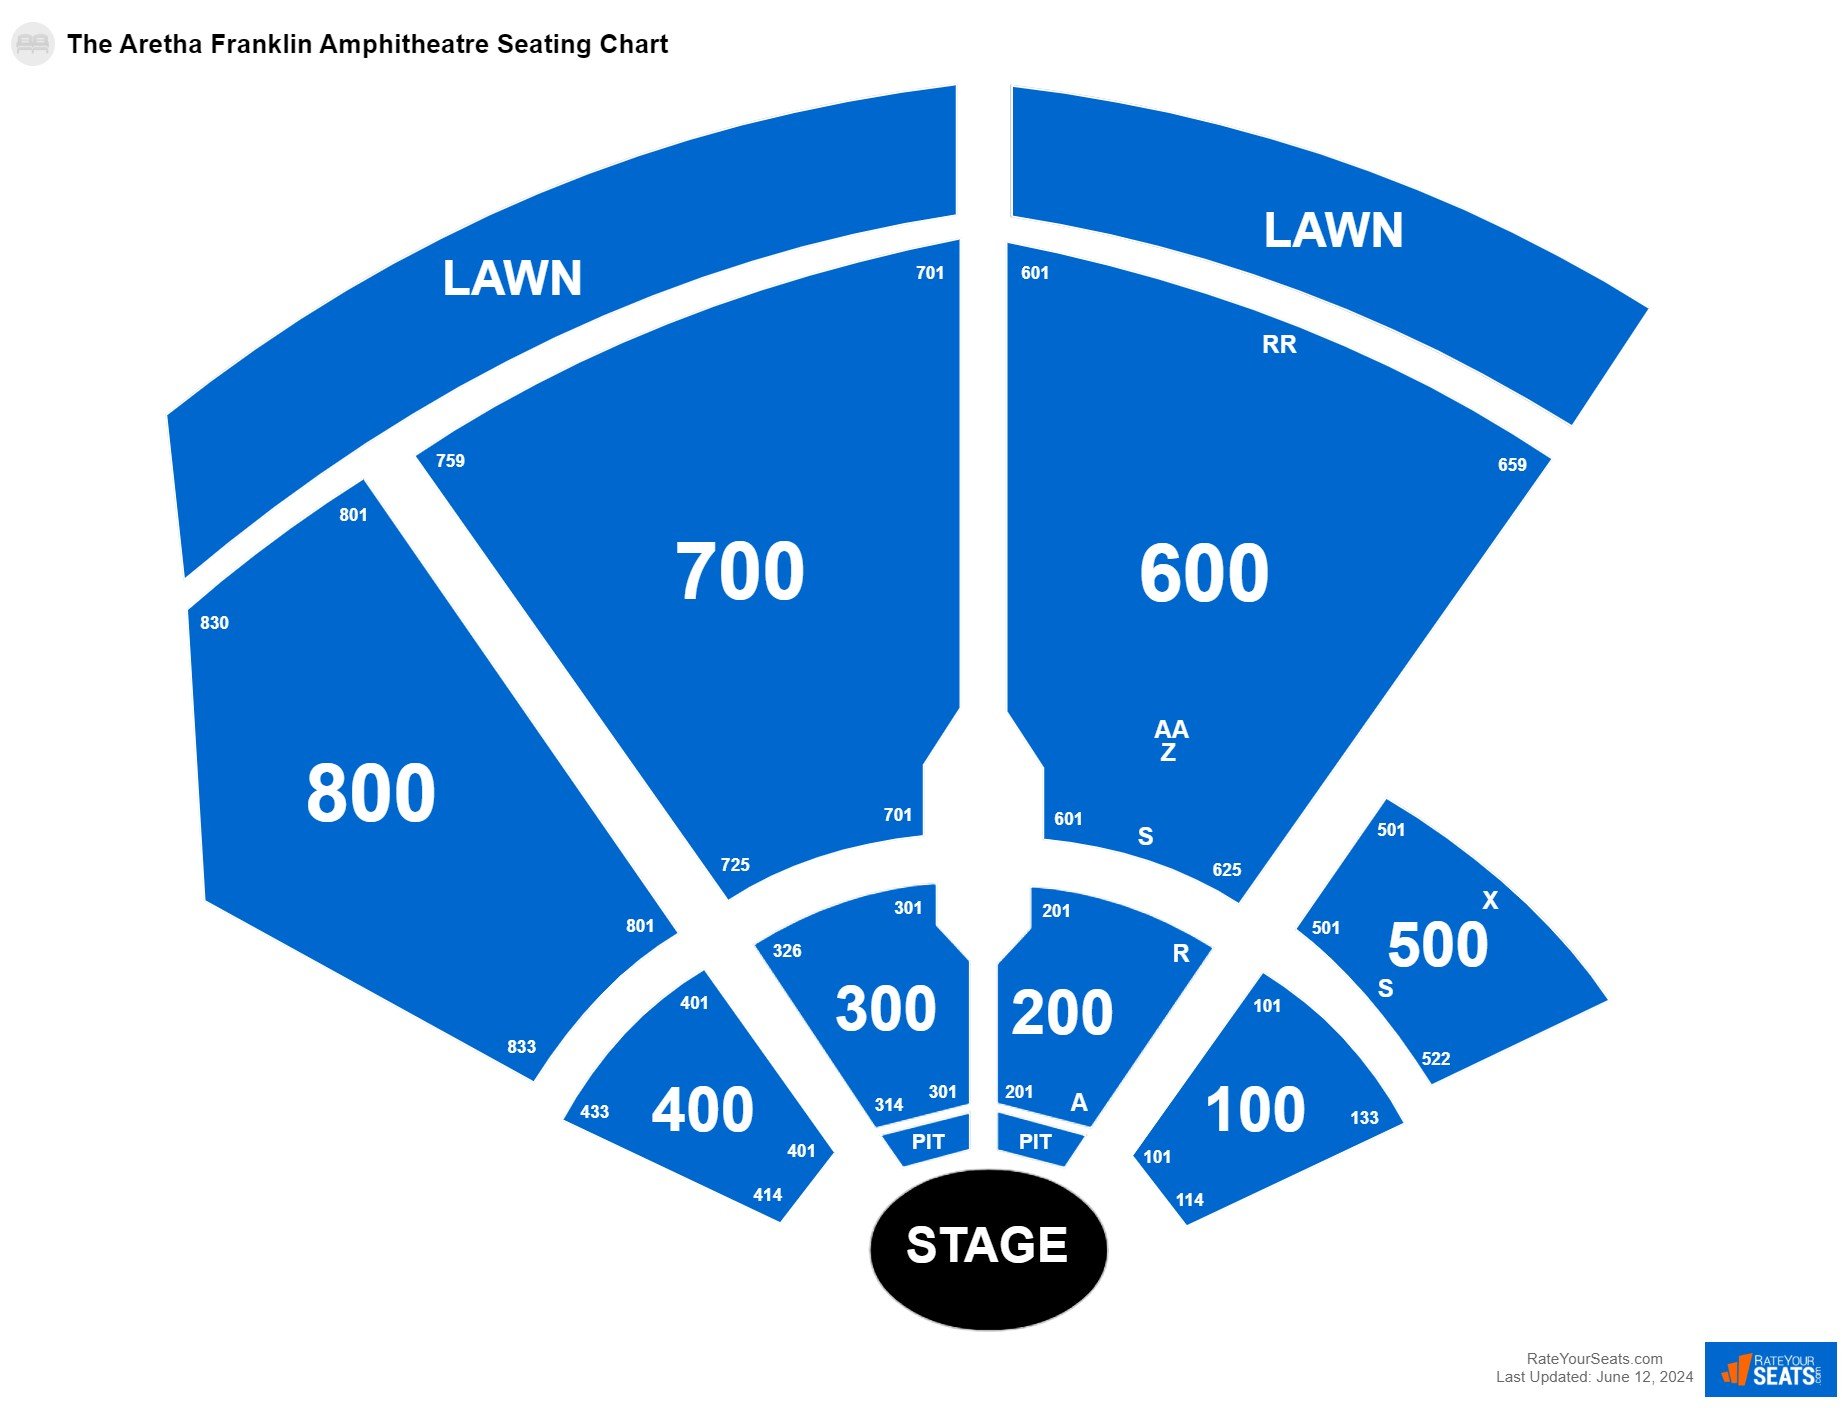 Concert seating chart at The Aretha Franklin Amphitheatre